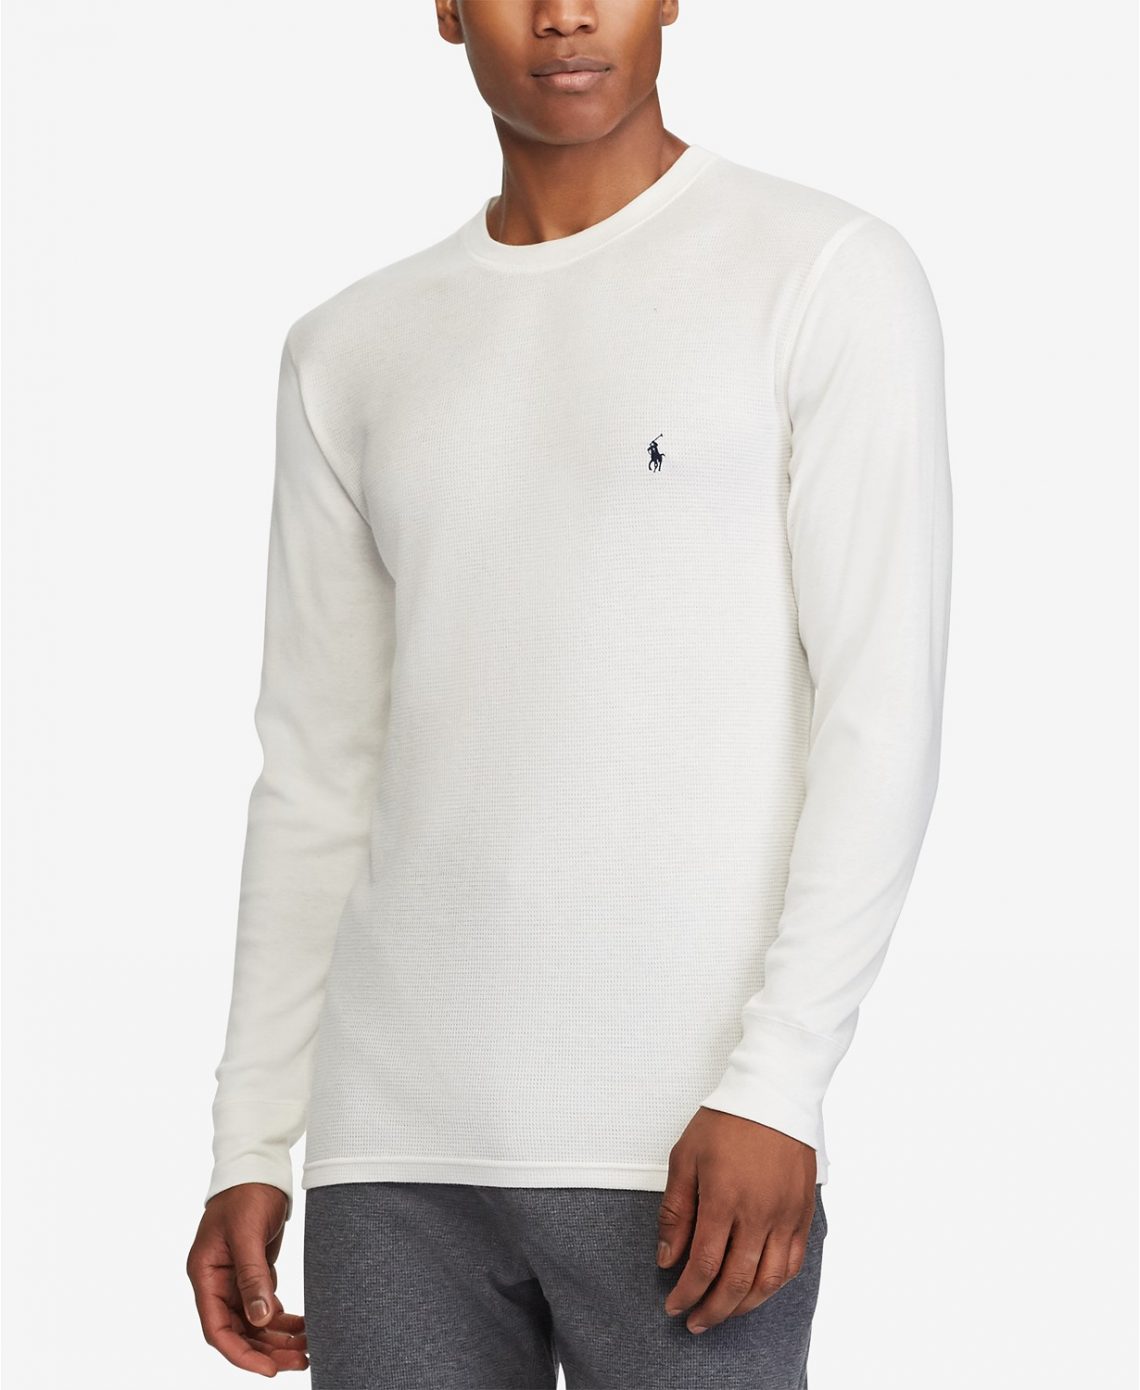 Polo Ralph Lauren Men’s Waffle-Knit Thermal Pajama Shirt for only $21. ...